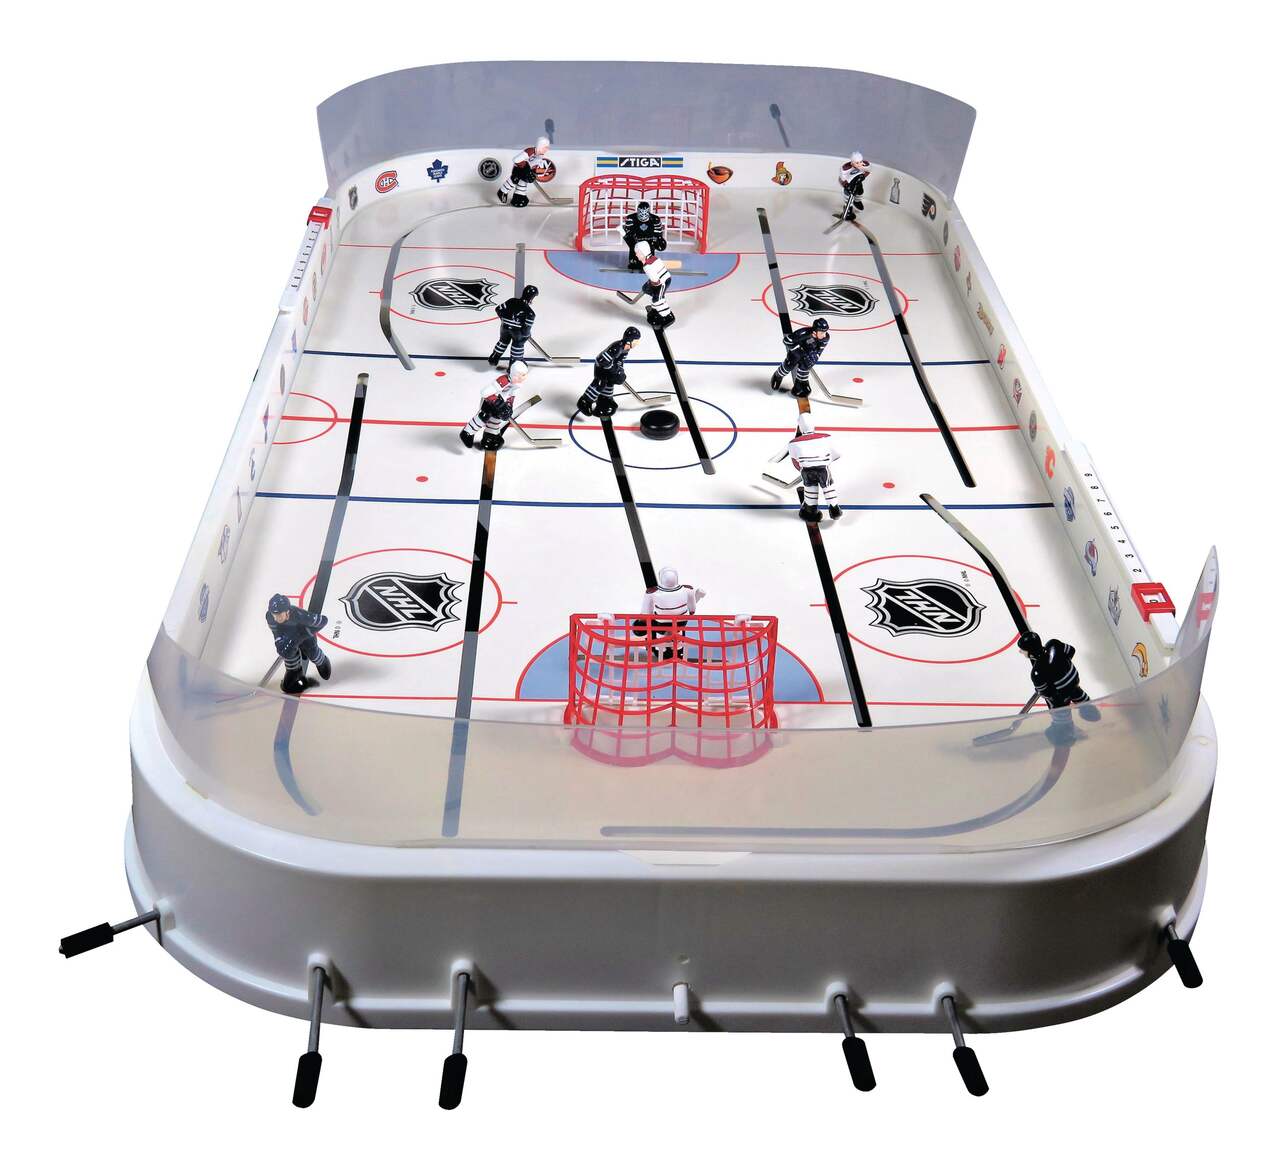  Stanley Cup 3T Table Hockey Game : Sports & Outdoors